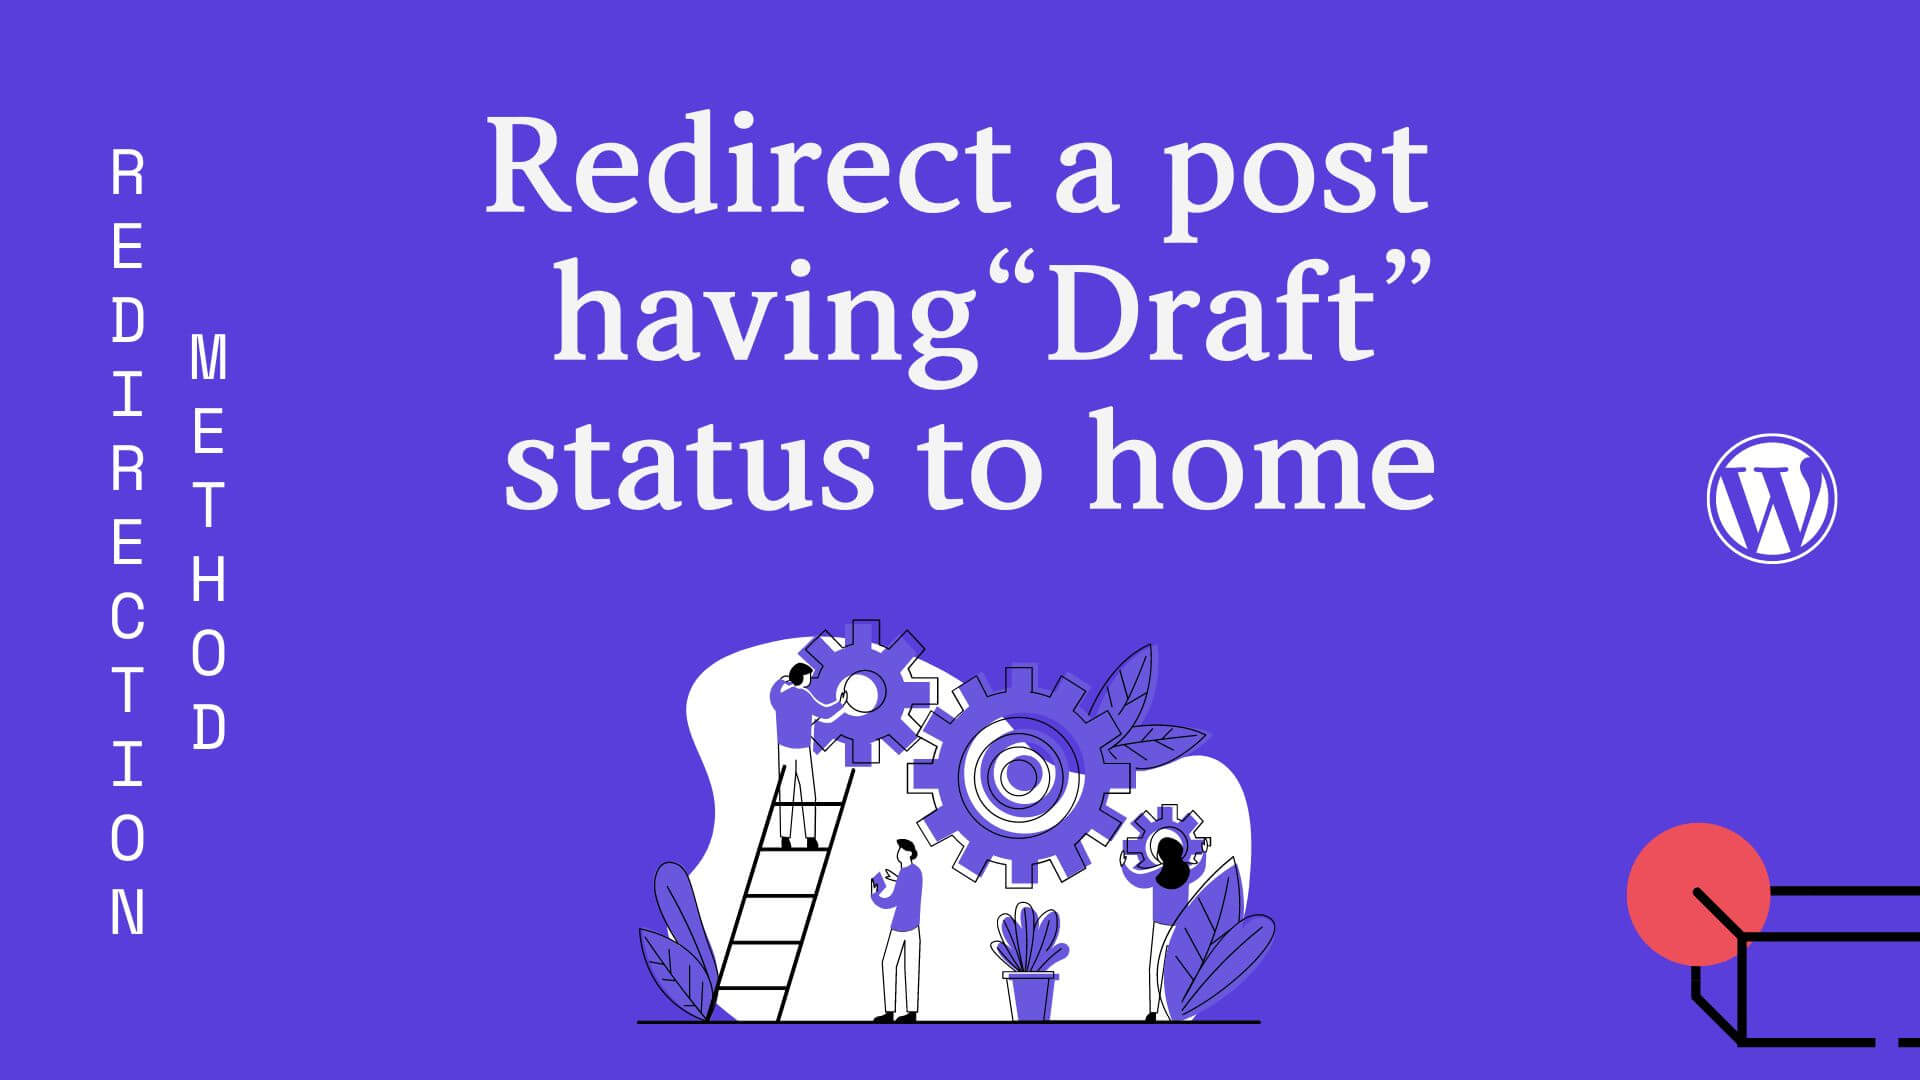 How to redirect a post having Draft status to the home page